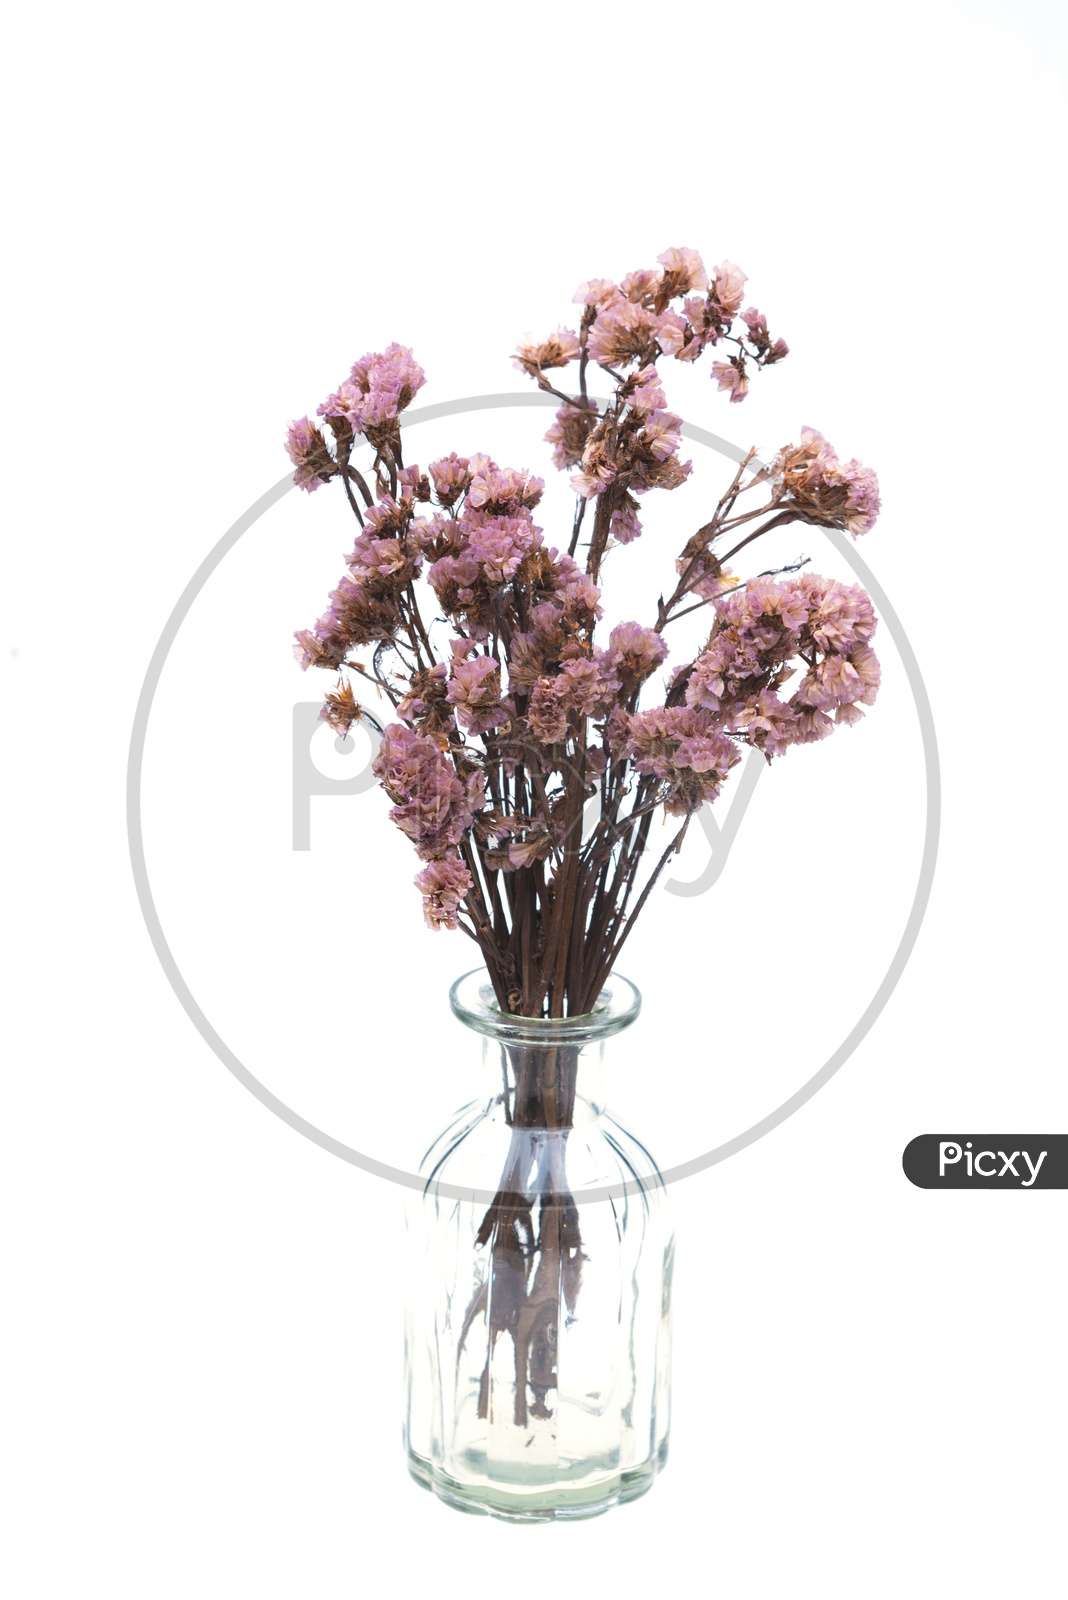 Dried pink flowers in a glass vase isolated on white background